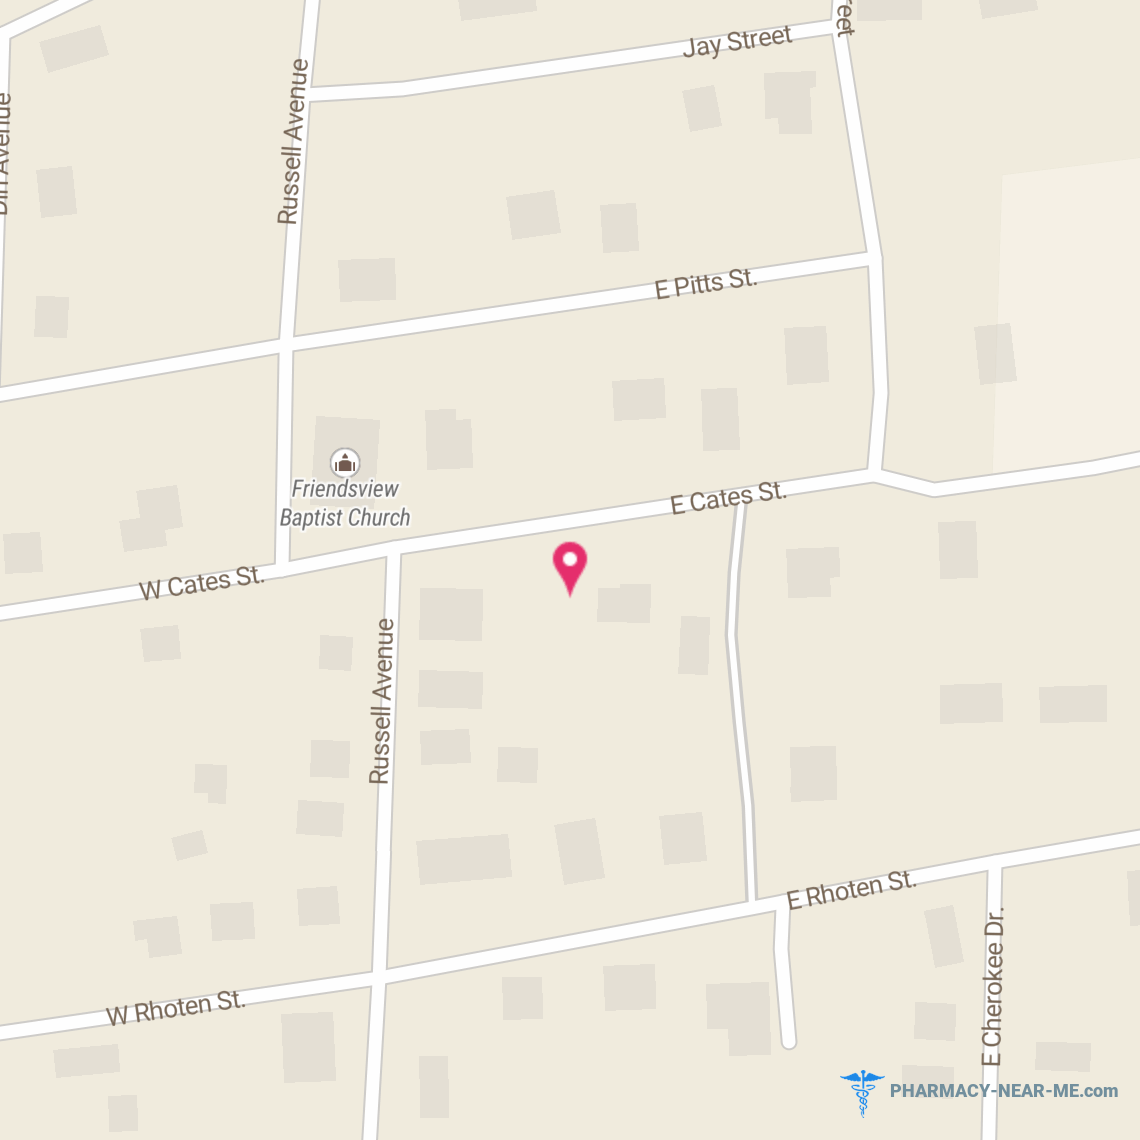 CATES STREET PHARMACY - Pharmacy Hours, Phone, Reviews & Information: 104 Cates St, Dunlap, Tennessee 37327, United States